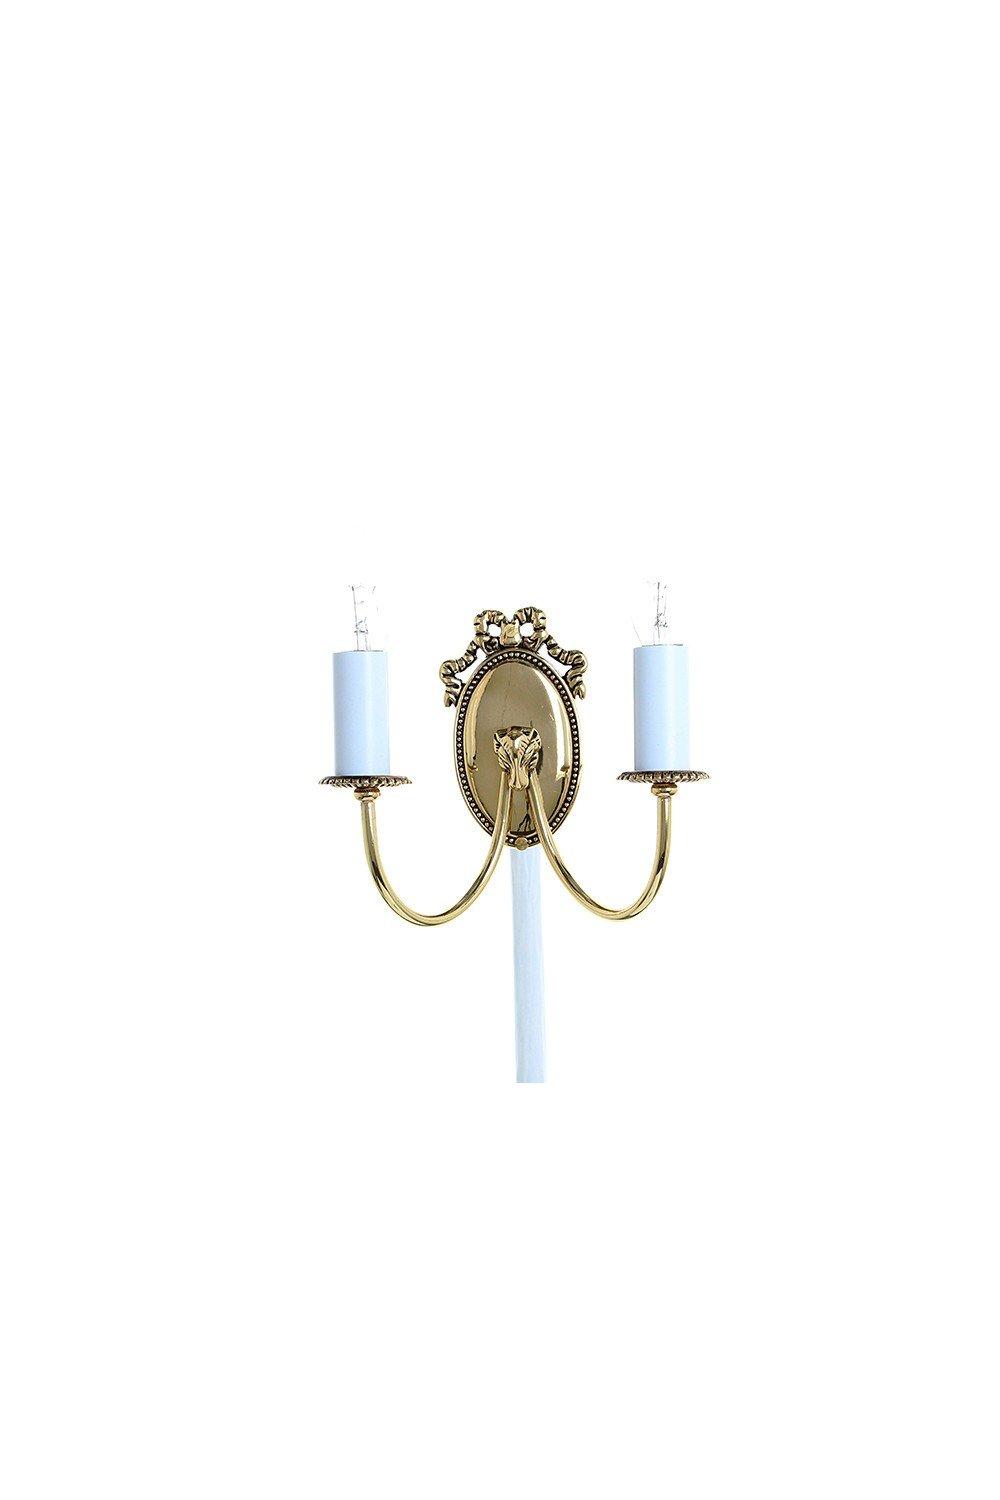 Eden Polished Brass Candle Wall Lamp